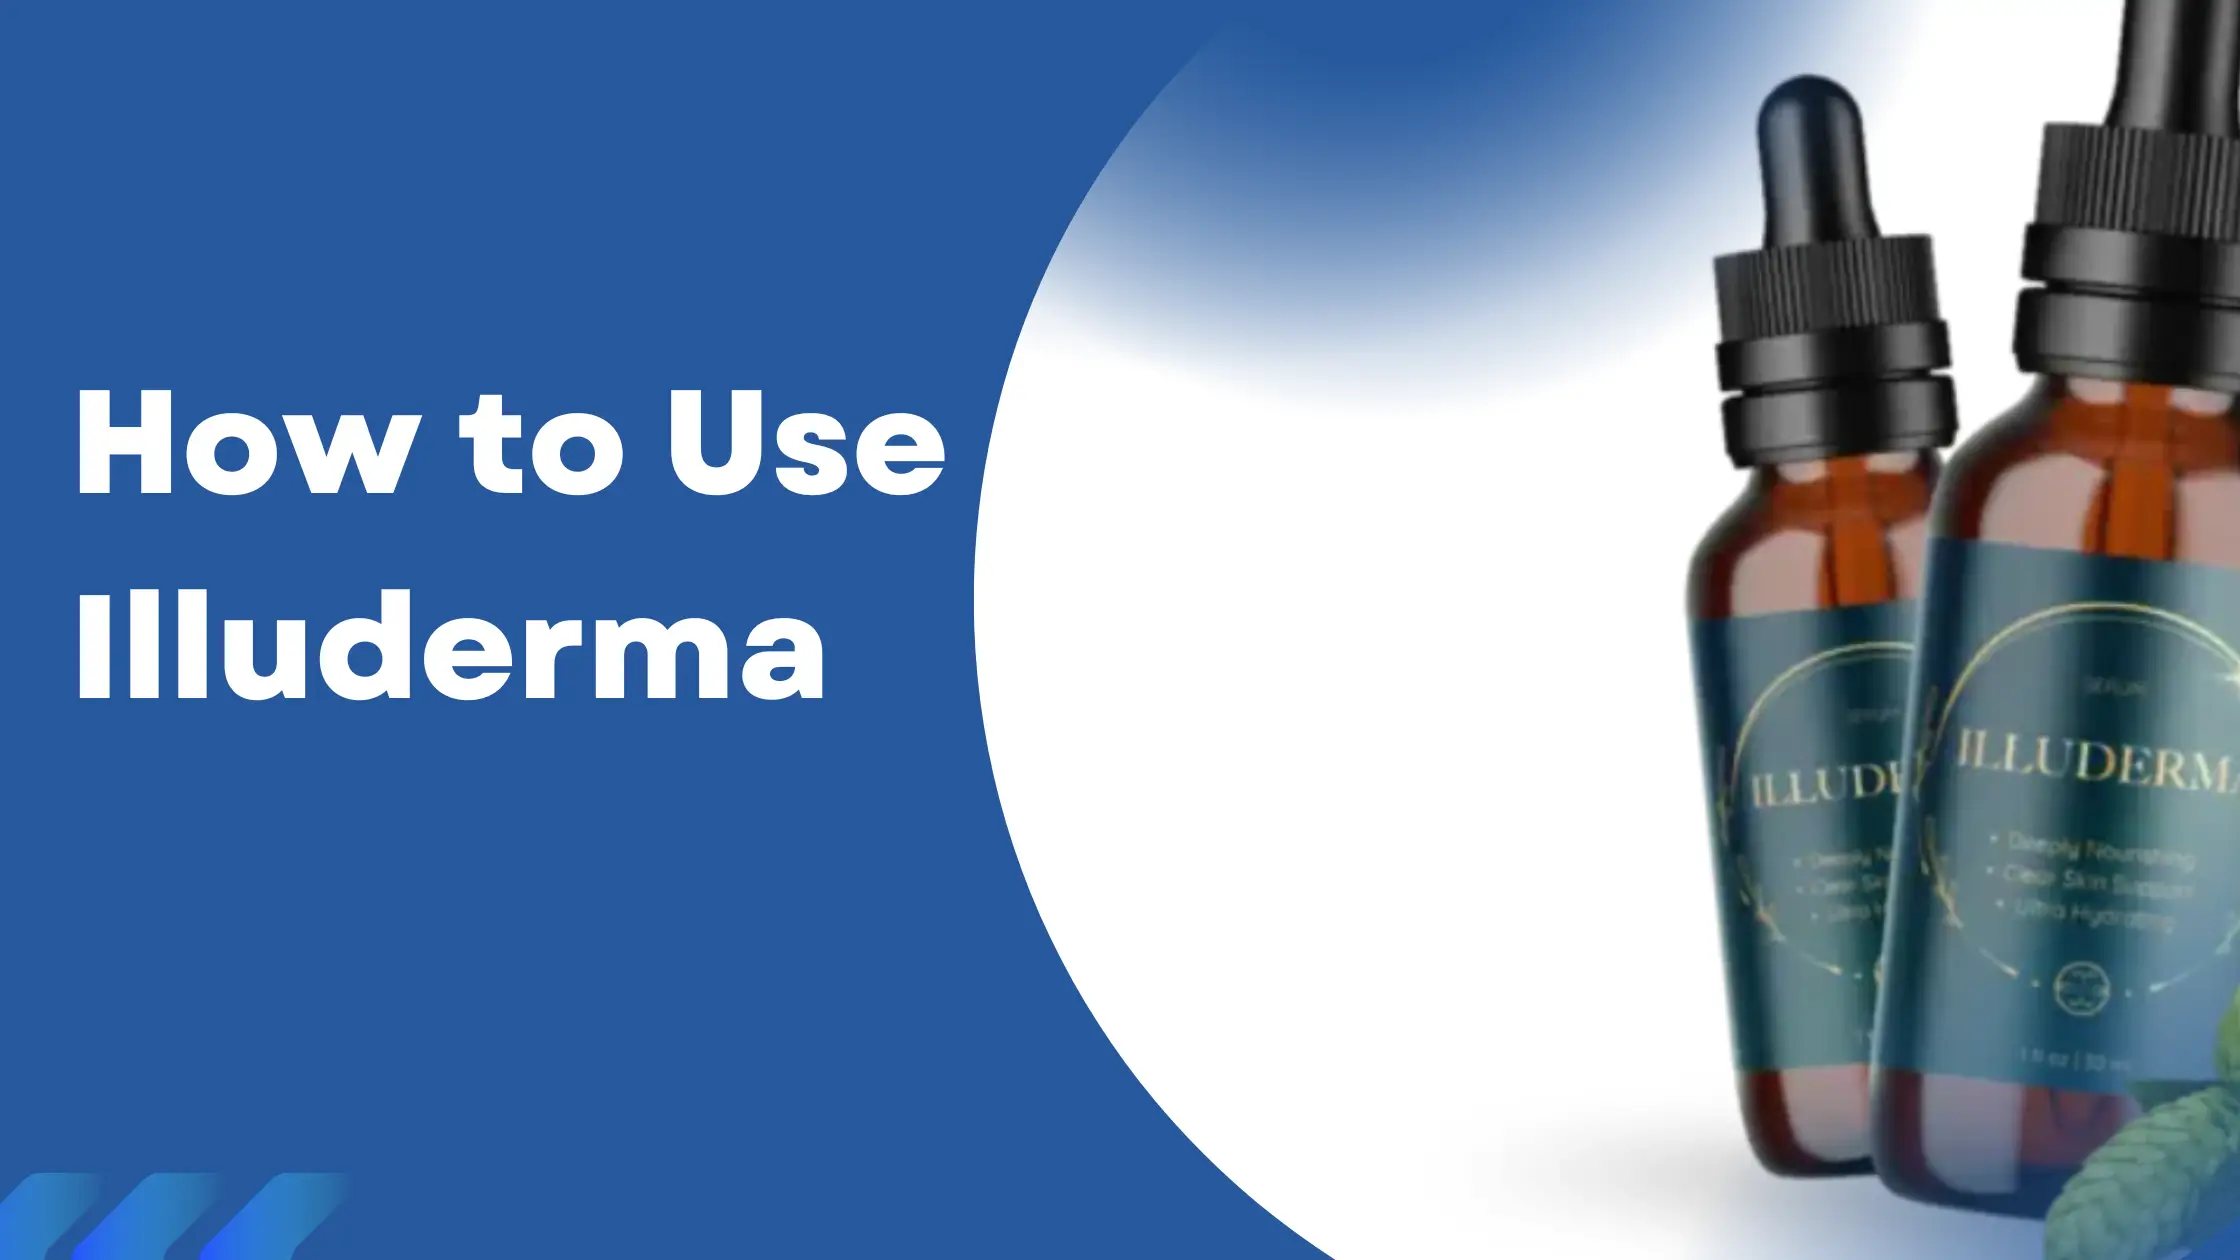 How to Use Illuderma